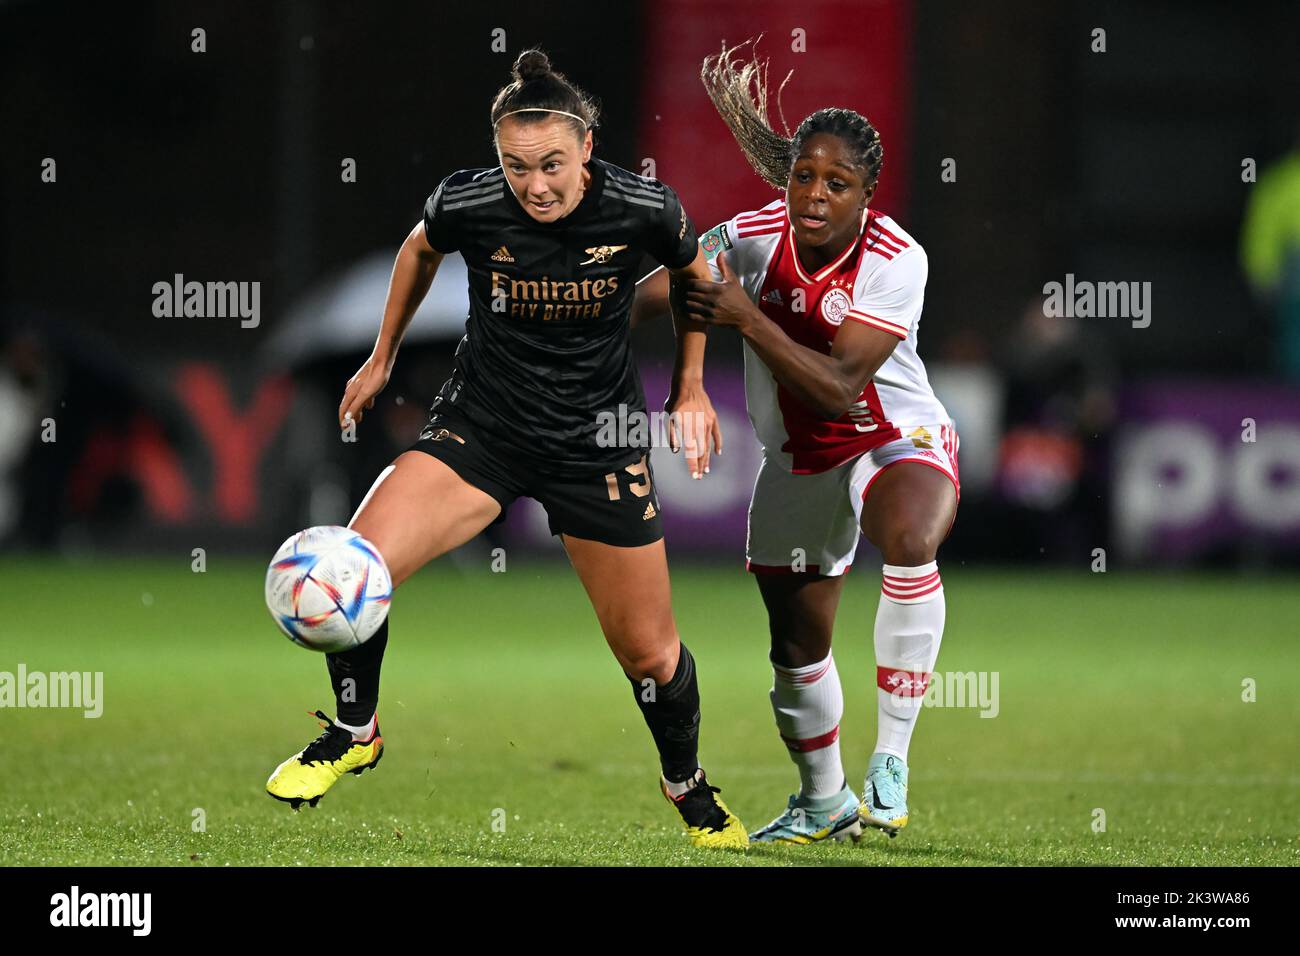 AMSTERDAM - (lr) Caitlin Foord of Arsenal WFC, Liza van der Most of Ajax women during the UEFA Champions League women's match between Ajax Amsterdam and Arsenal FC at De Toekomst sports complex on September 28, 2022 in Amsterdam, Netherlands. ANP GERRIT VAN COLOGNE Stock Photo